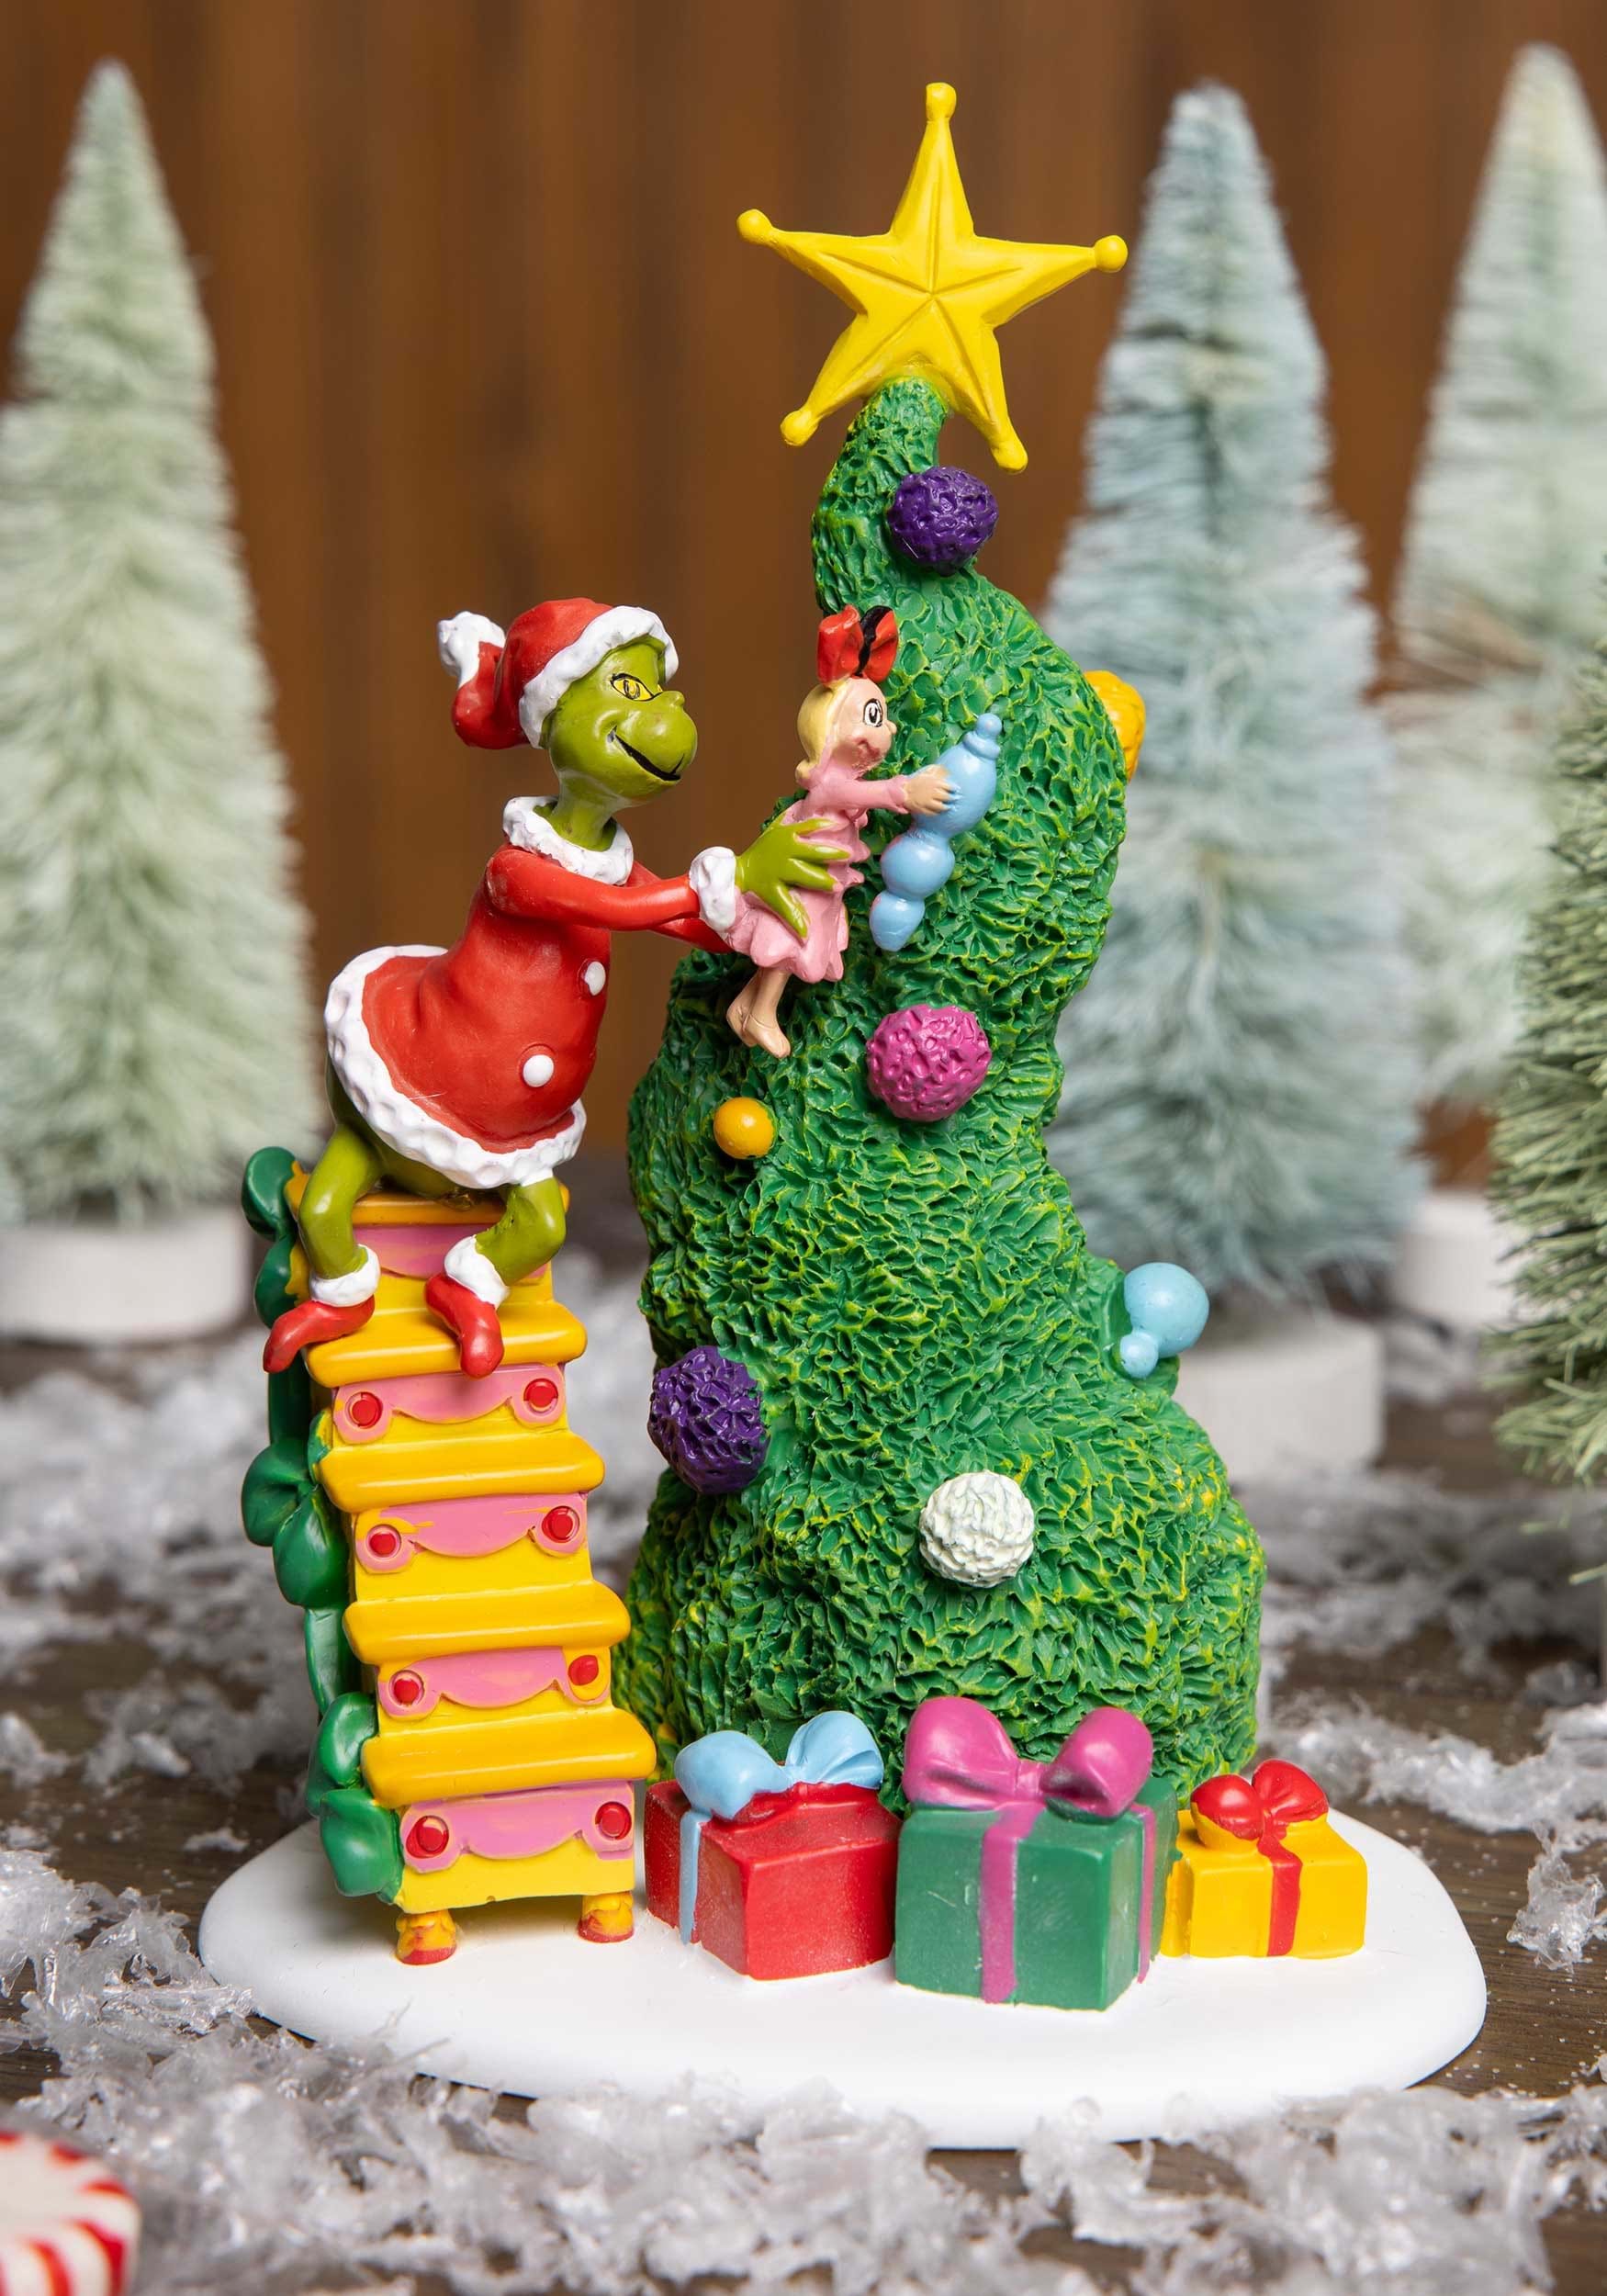 Department 56 It Takes Two, Grinch & Cindy Lou Who Tree Figure